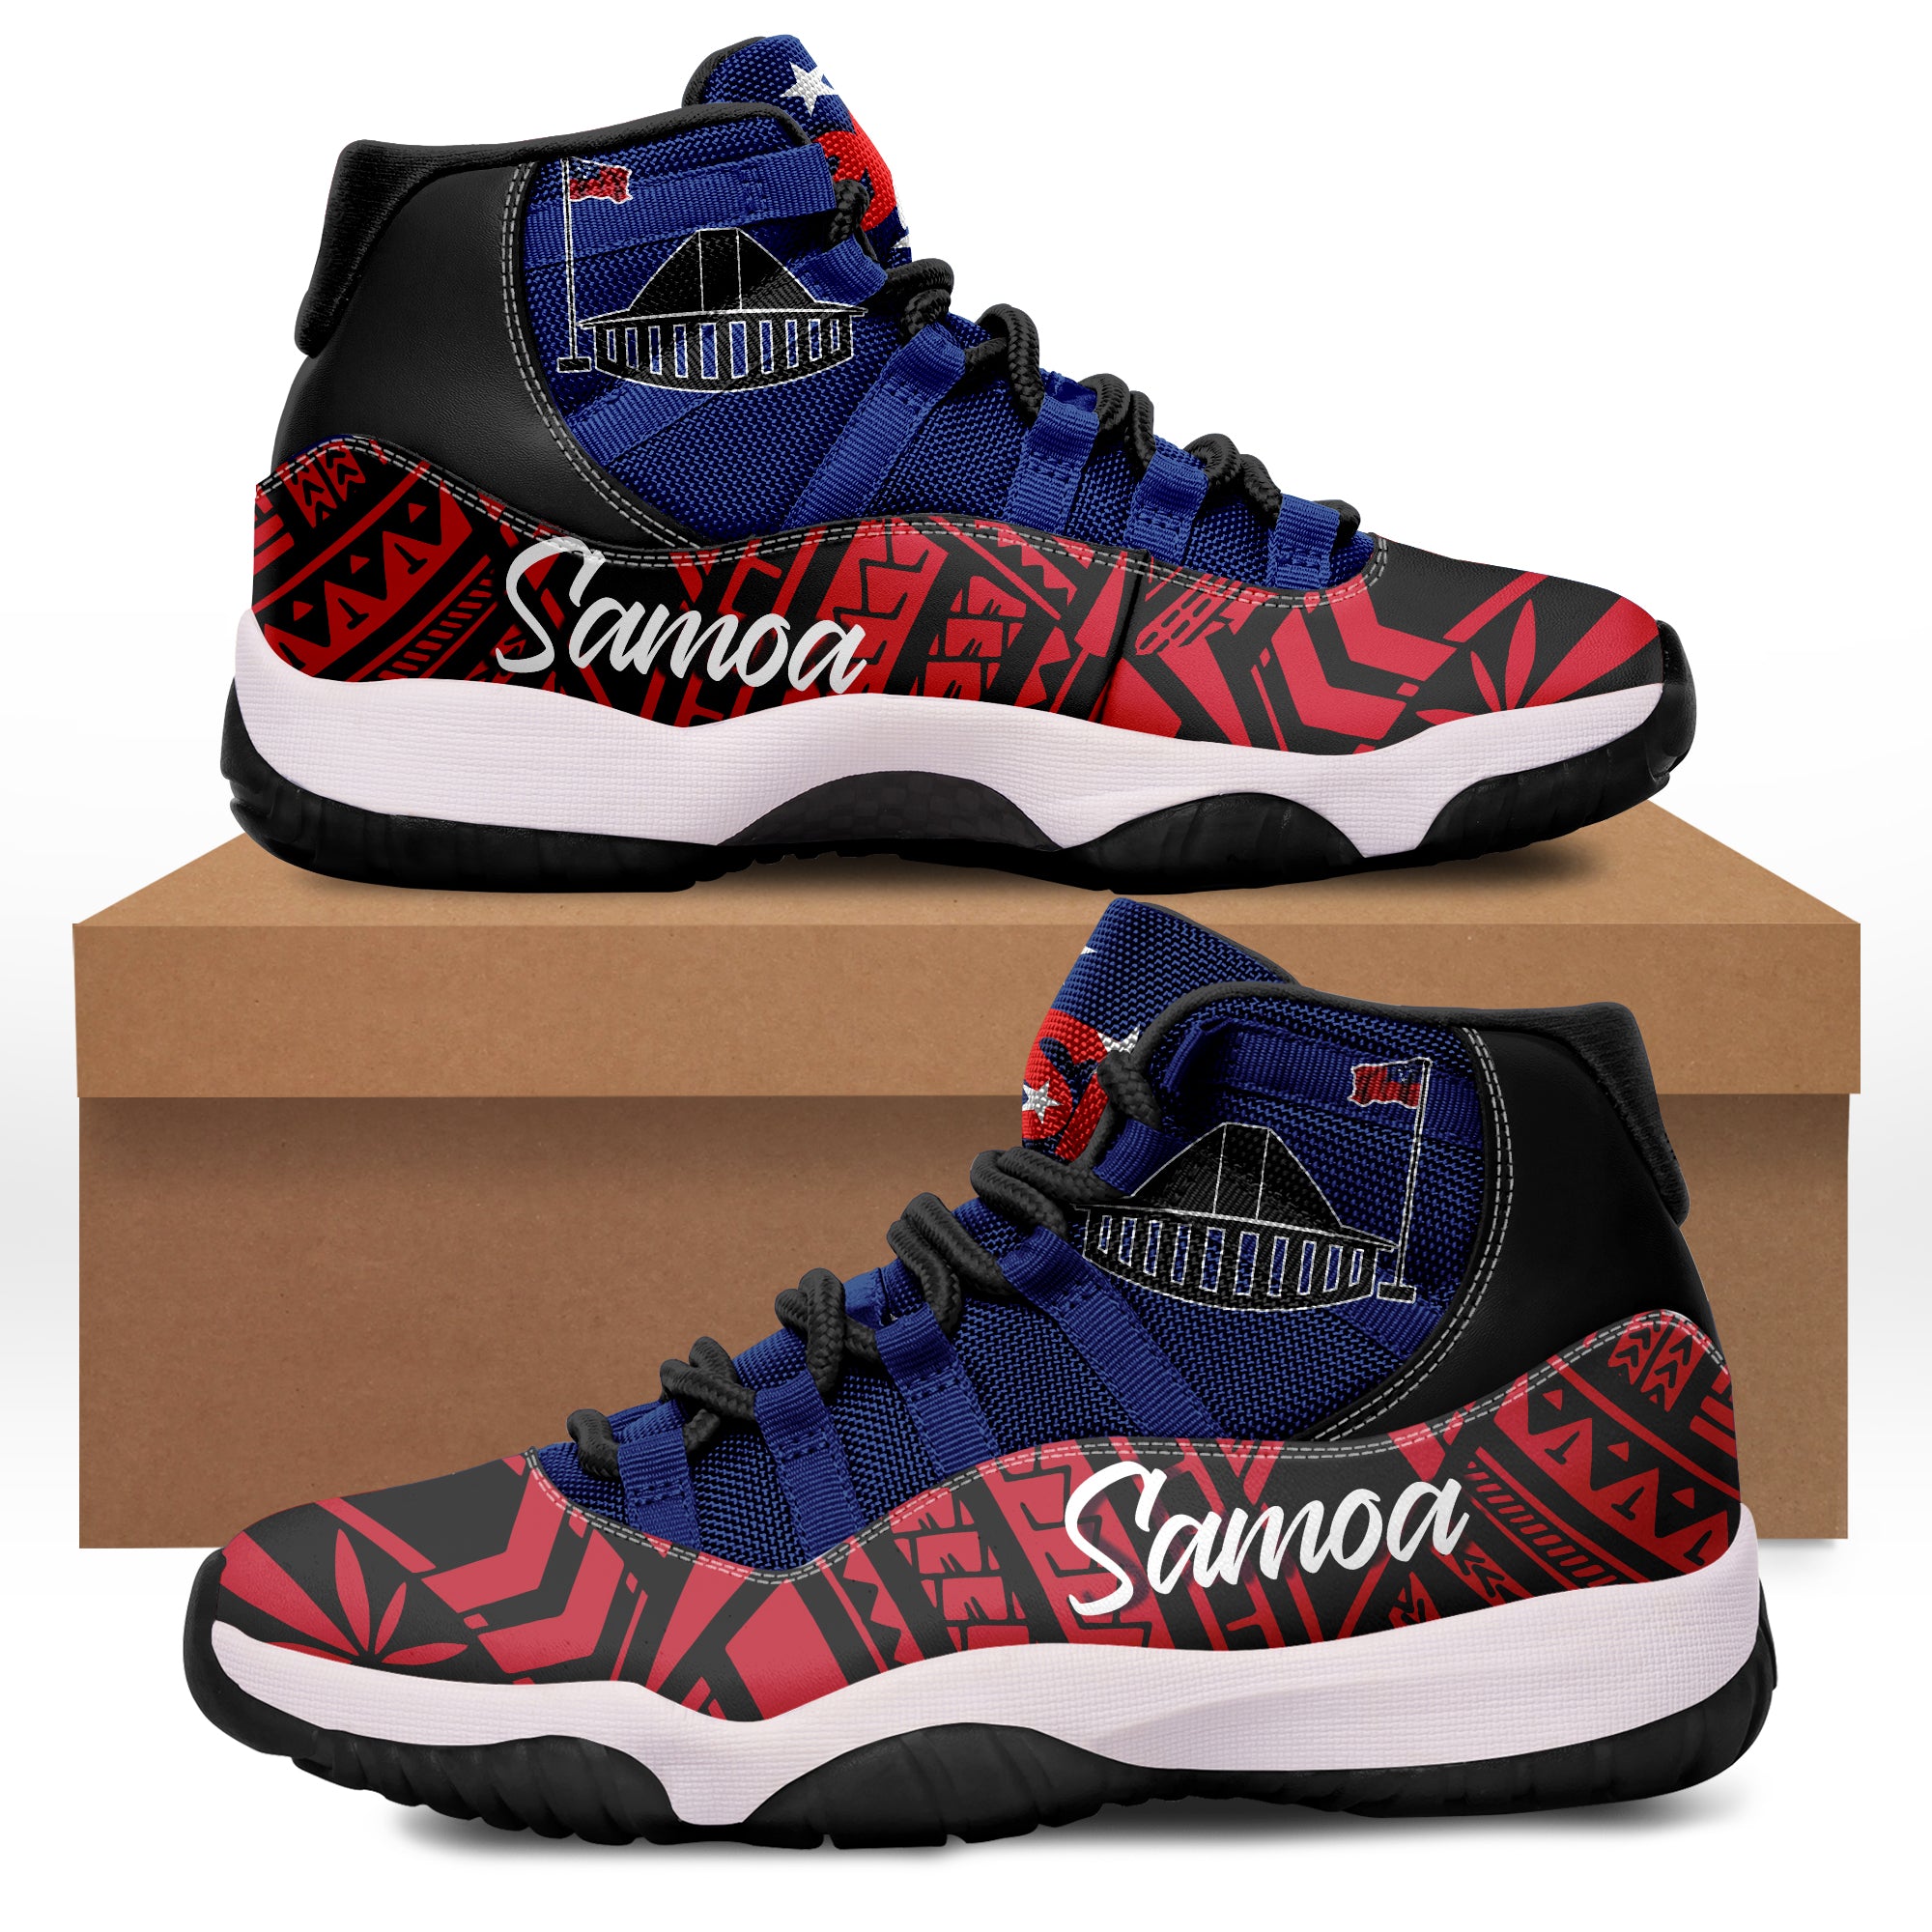 FAST Samoa Sneakers J.11 Special Style Ver.03 LT7 Red - Polynesian Pride